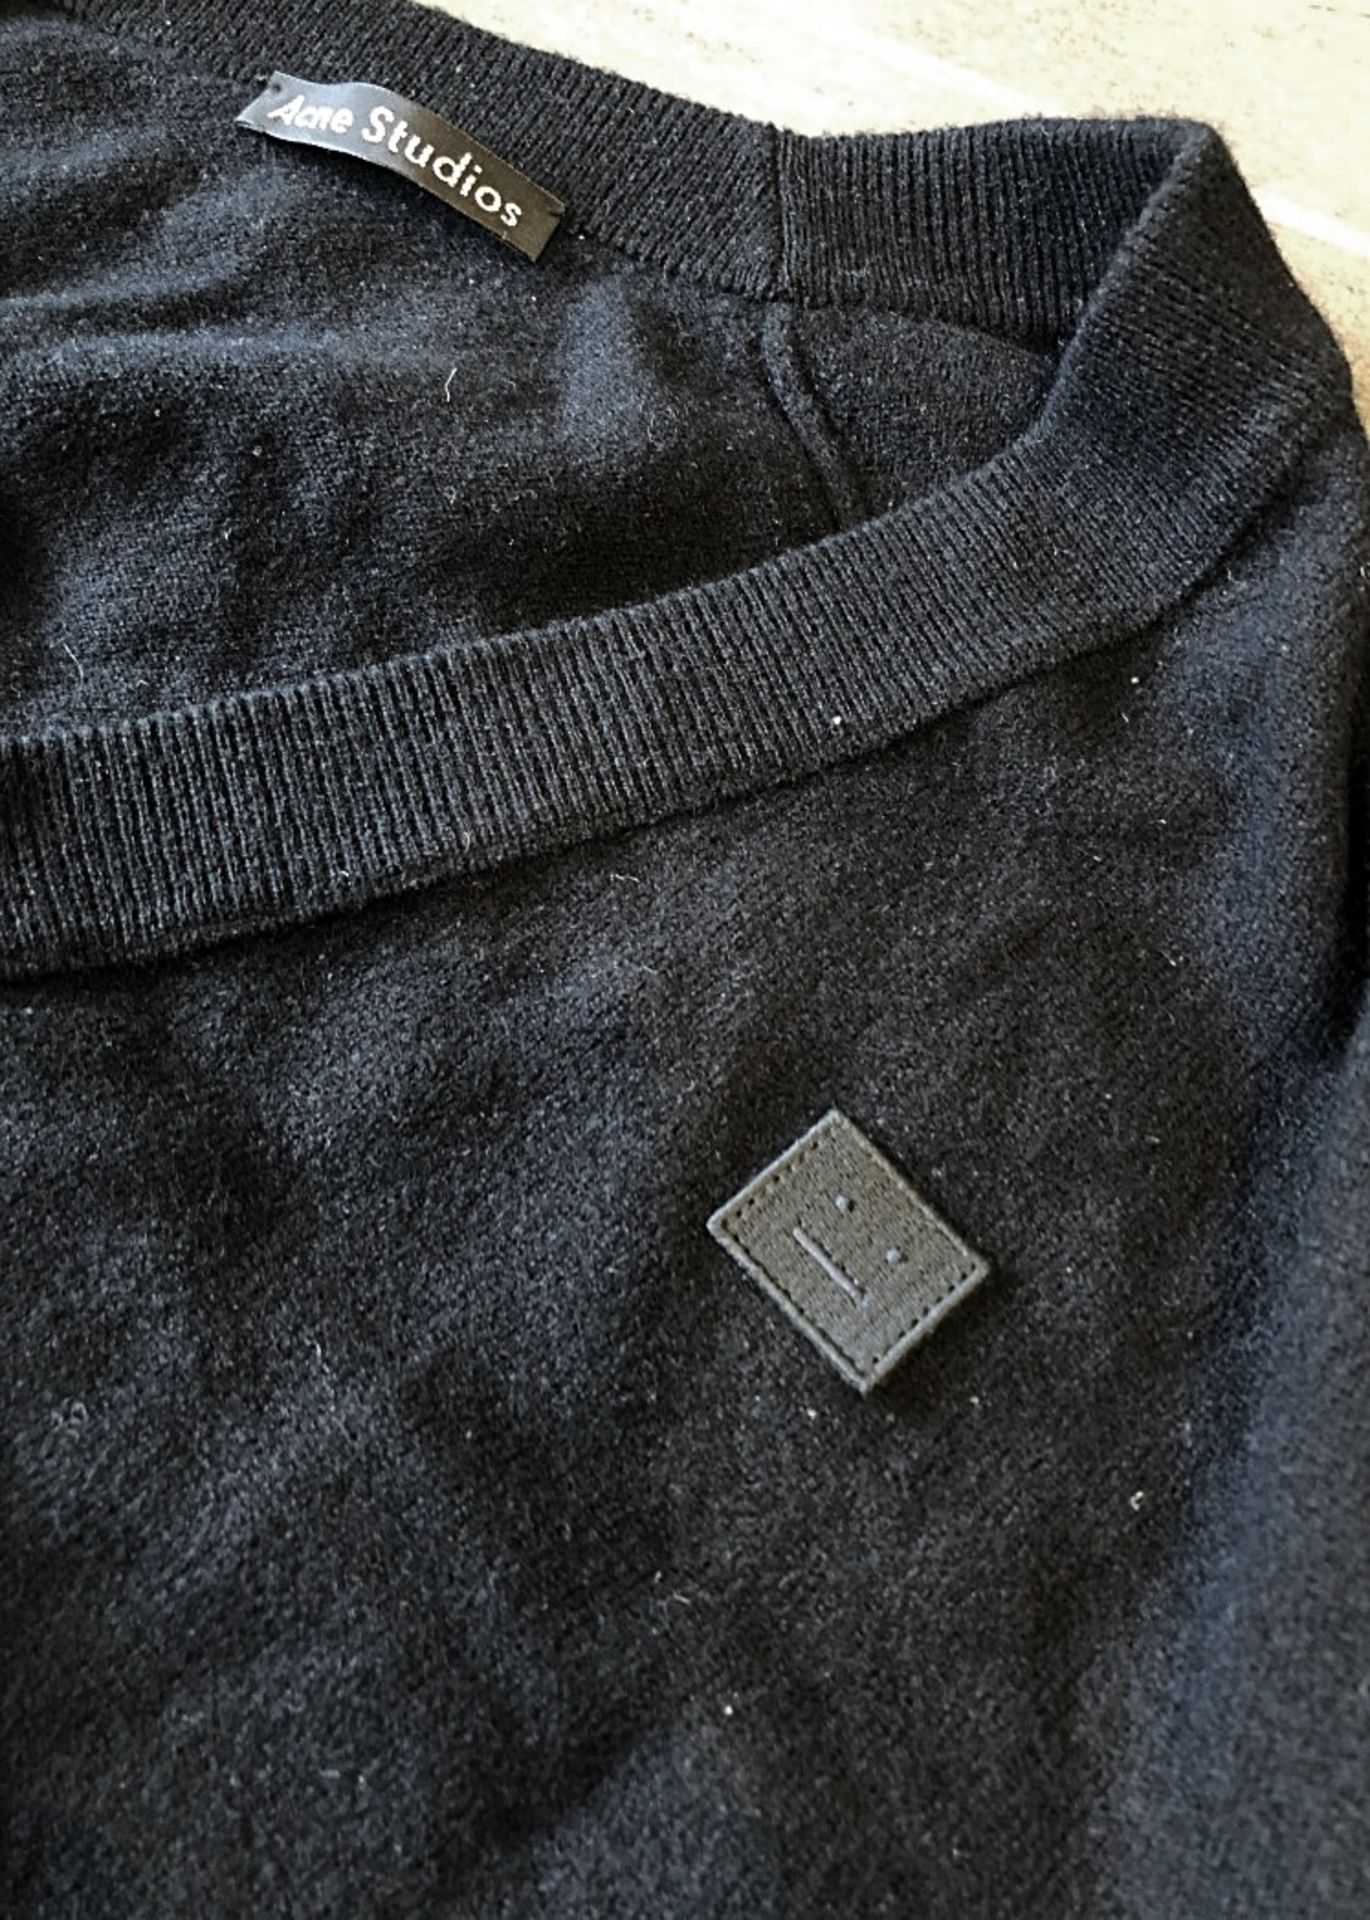 1 x Men's Genuine Acne Studios Sweater In Black - Preowned - Ref: JS193 - NO VAT ON THE HAMMER - - Image 4 of 5